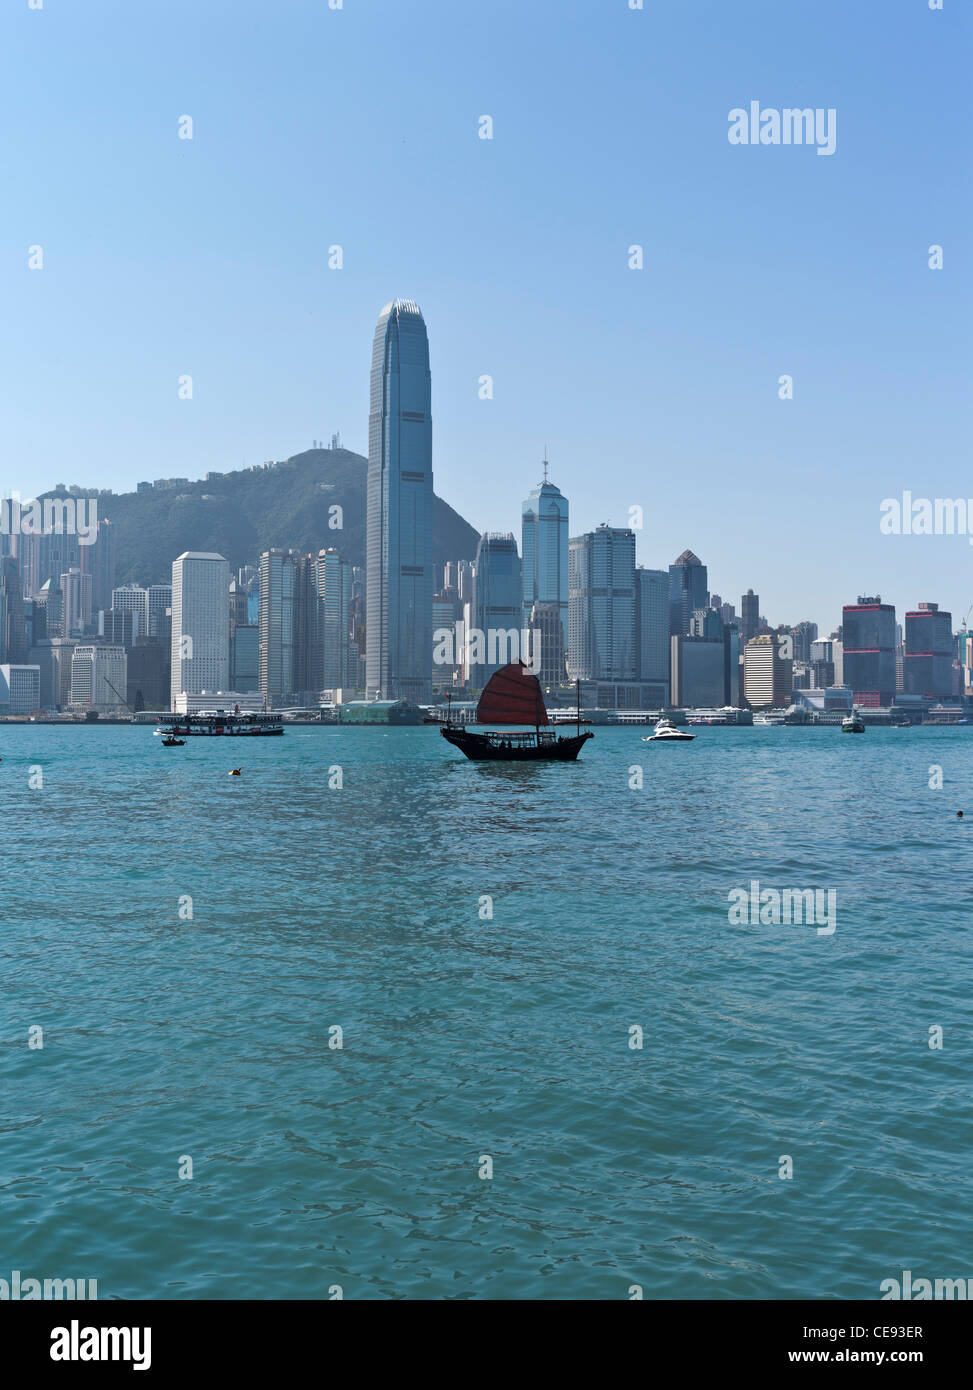 dh Hong Kong Harbour CENTRAL HONG KONG Red sail junk harbour Central buildings IFC2 and Victoria Peak harbor daytime skyline chinese boat cityscape Stock Photo